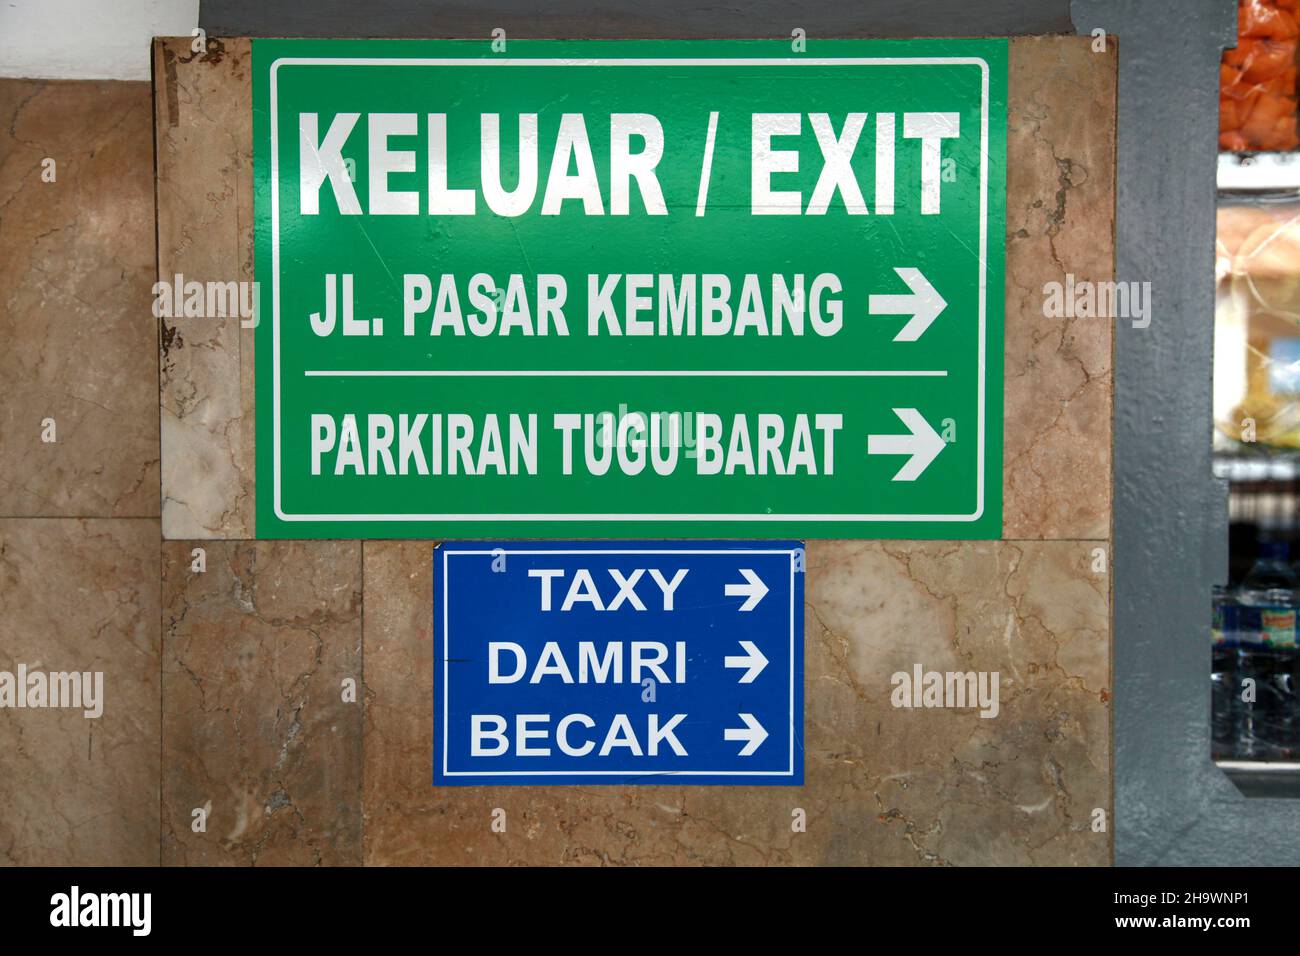 A sign at the exit of Yogyakarta train station in Central Java, Indonesia showing where to find a becak, taxi and damri bus. Stock Photo